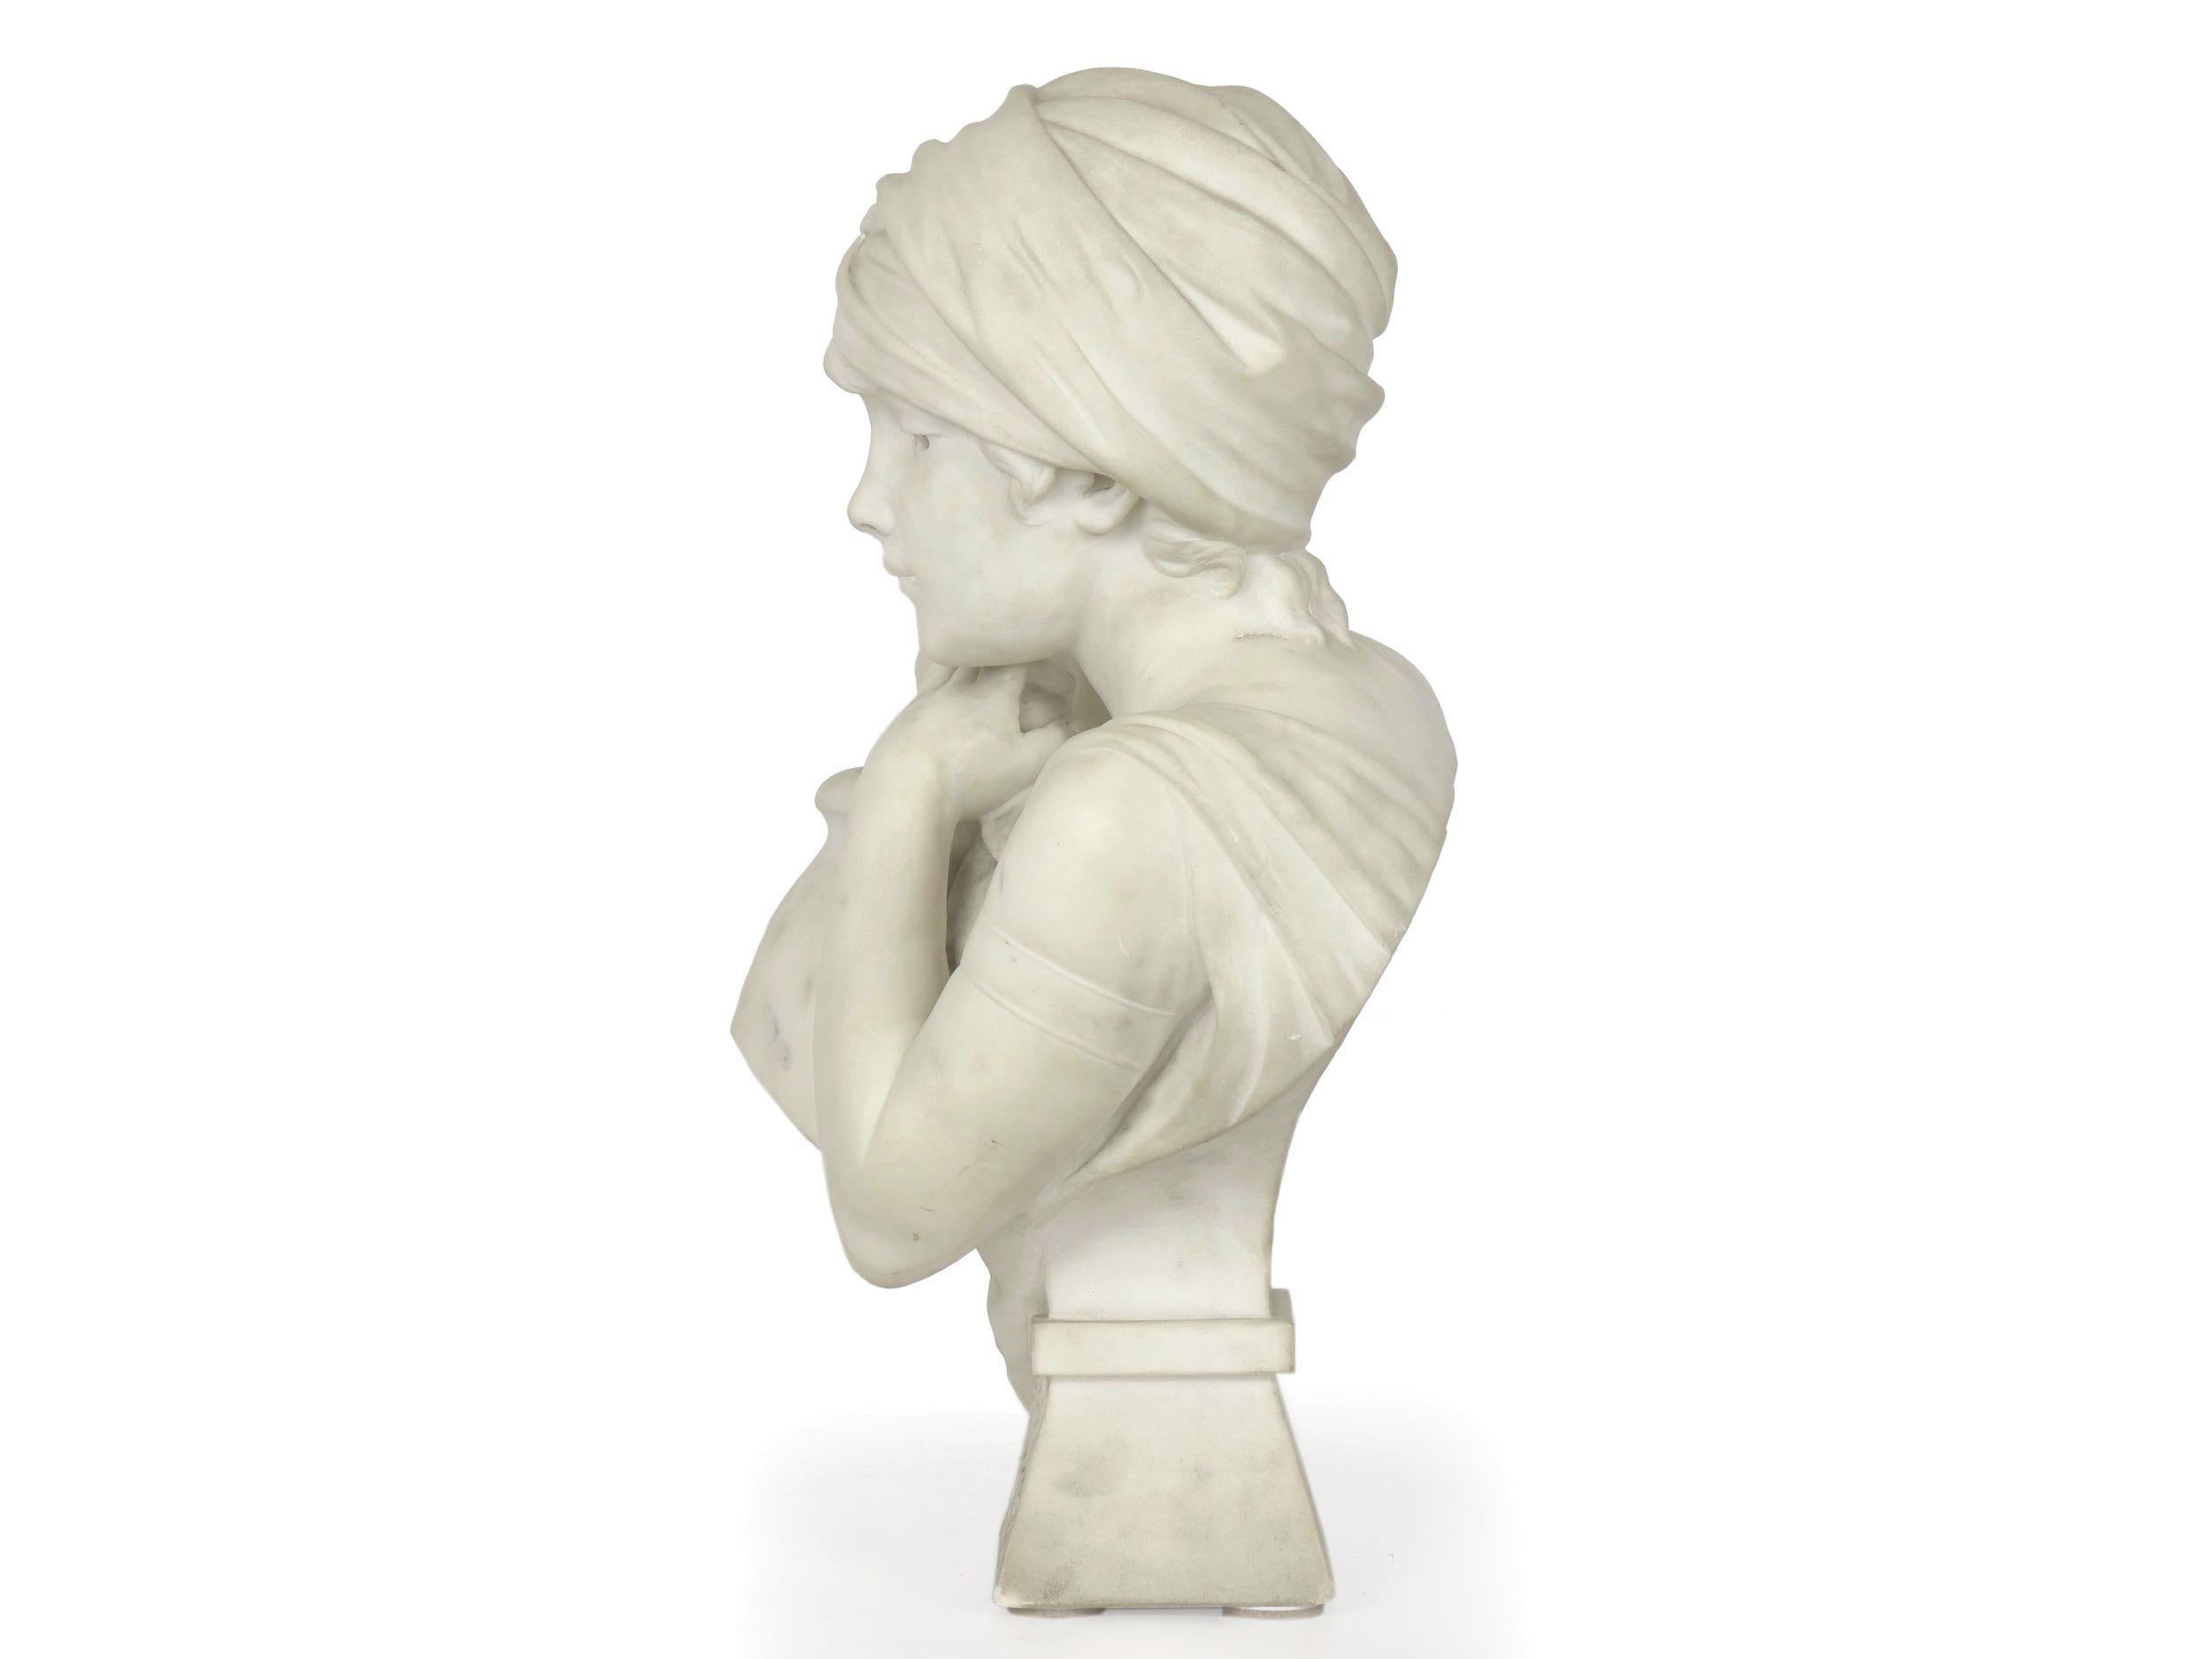 Carved “Rebecca at the Well” Italian Marble Antique Bust Sculpture by Antonio Piazza